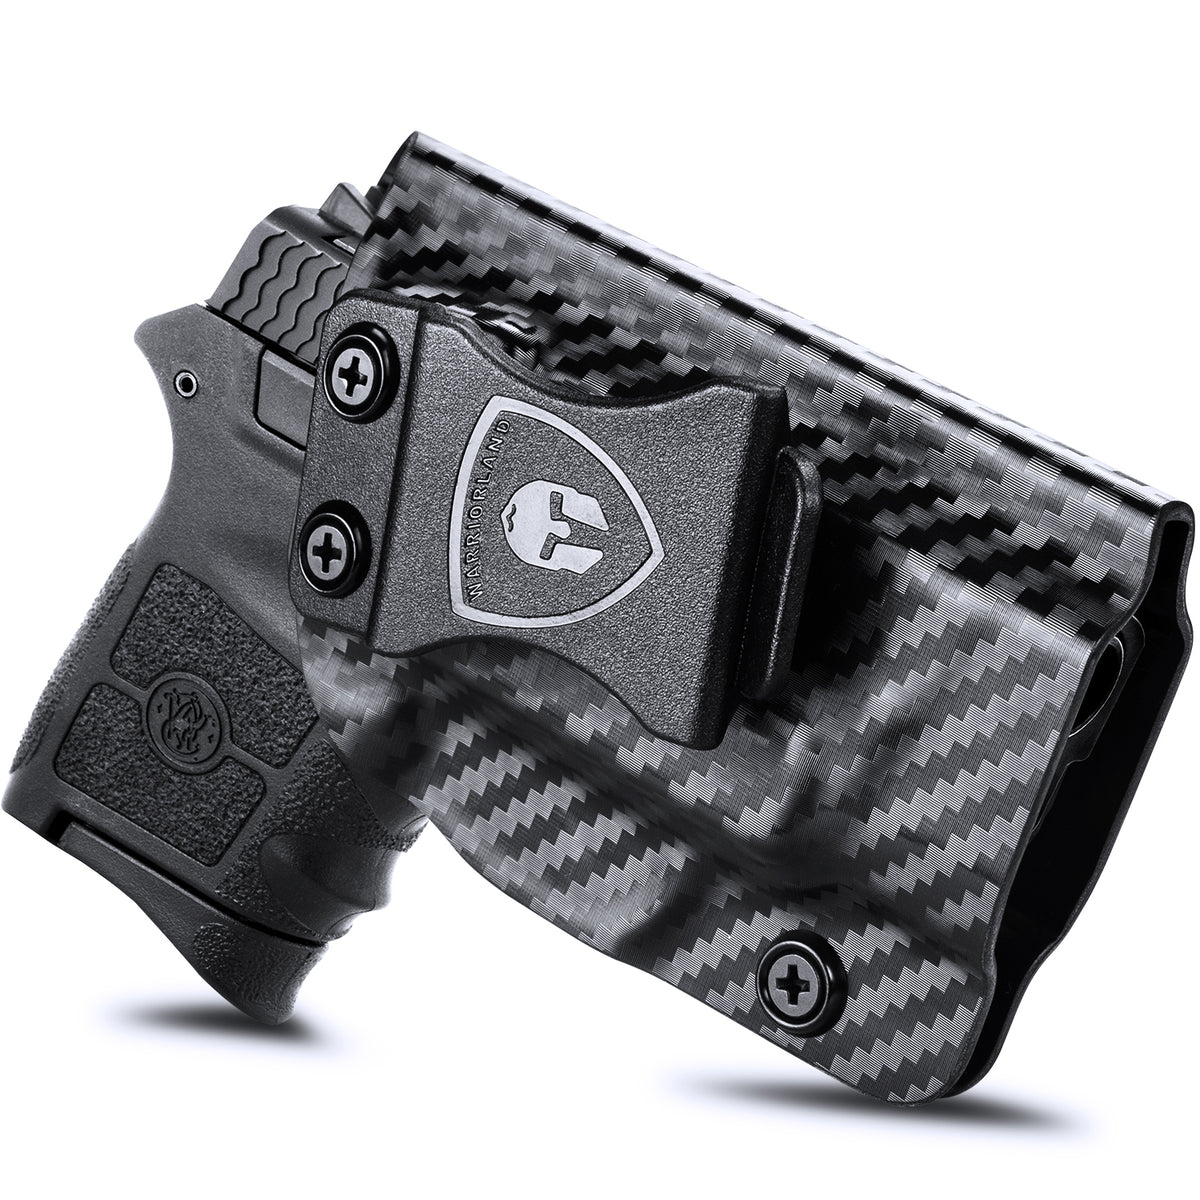 Smith & Wesson S&W M&P Bodyguard 380 Integrated Laser IWB Holster Carbon Fiber Kydex  | WARRIORLAND